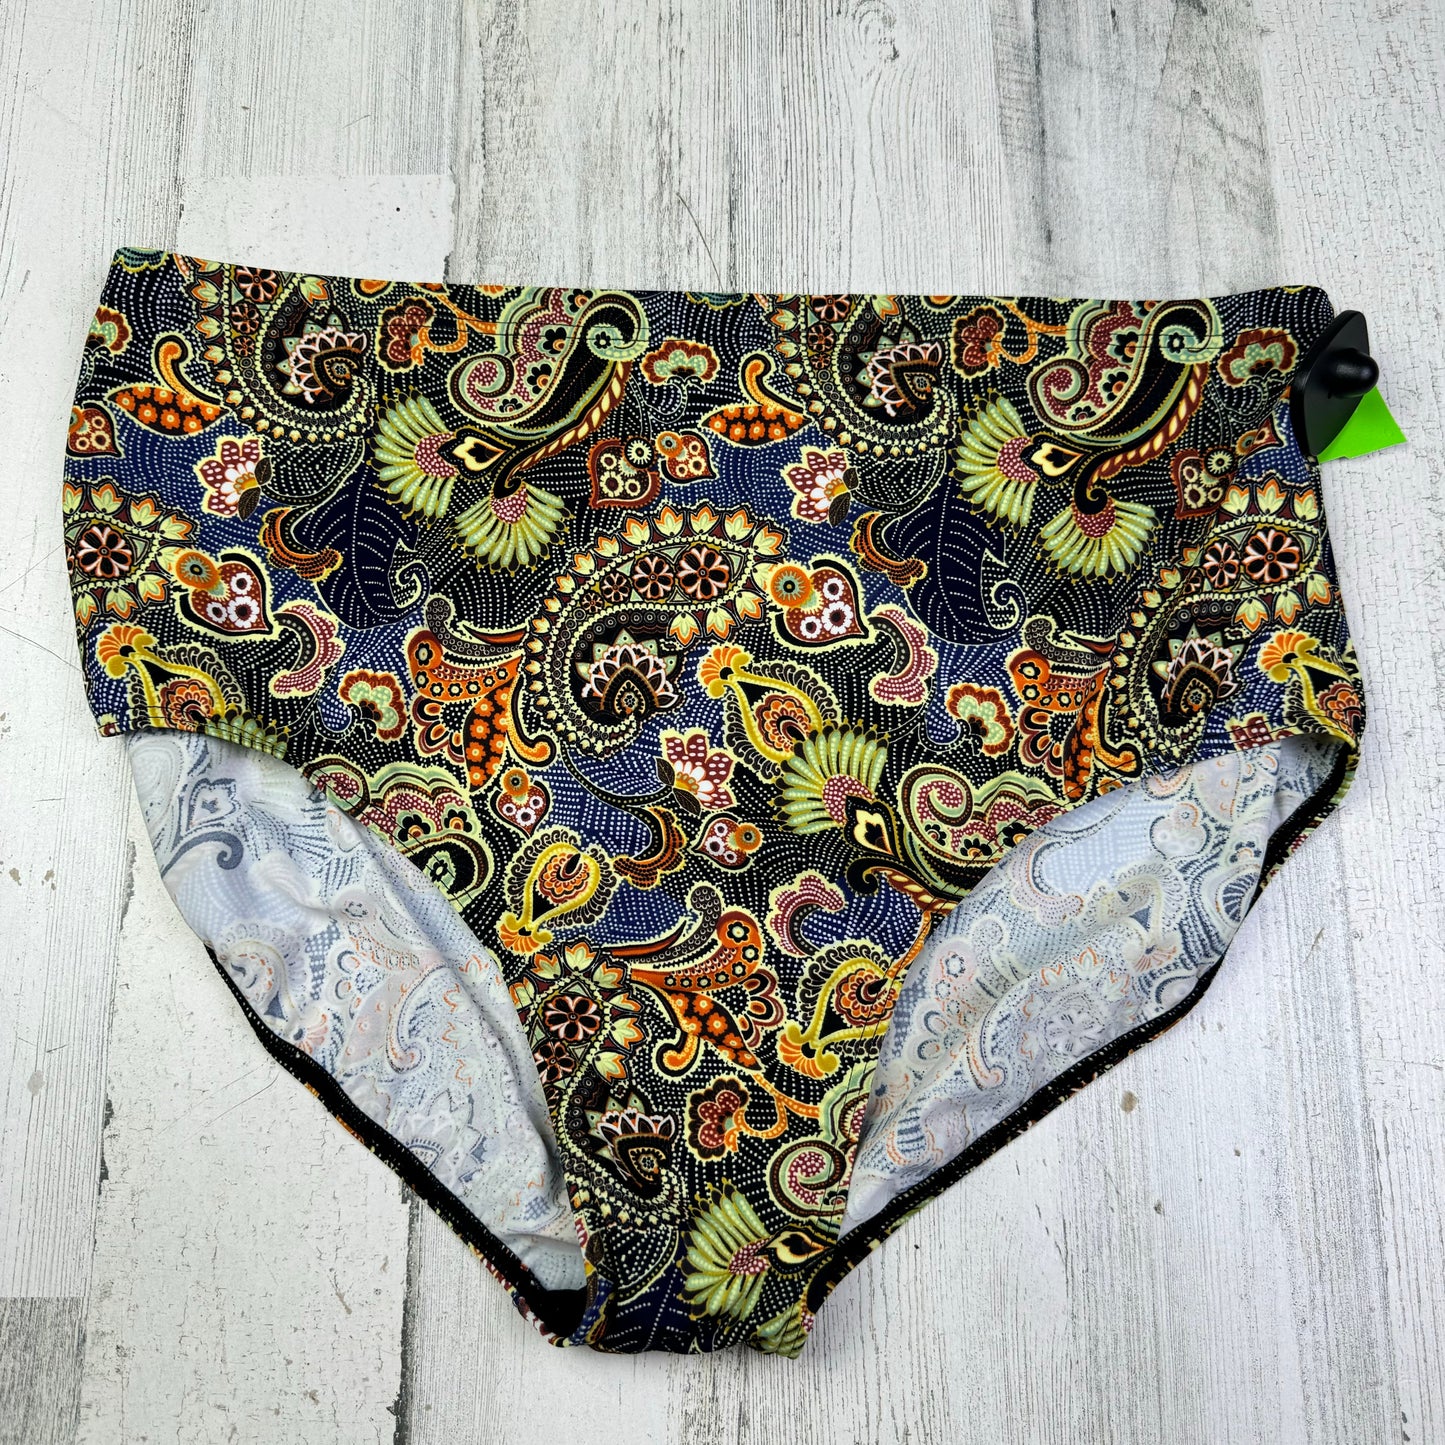 Brown & Green Swimsuit Bottom Clothes Mentor, Size 2x